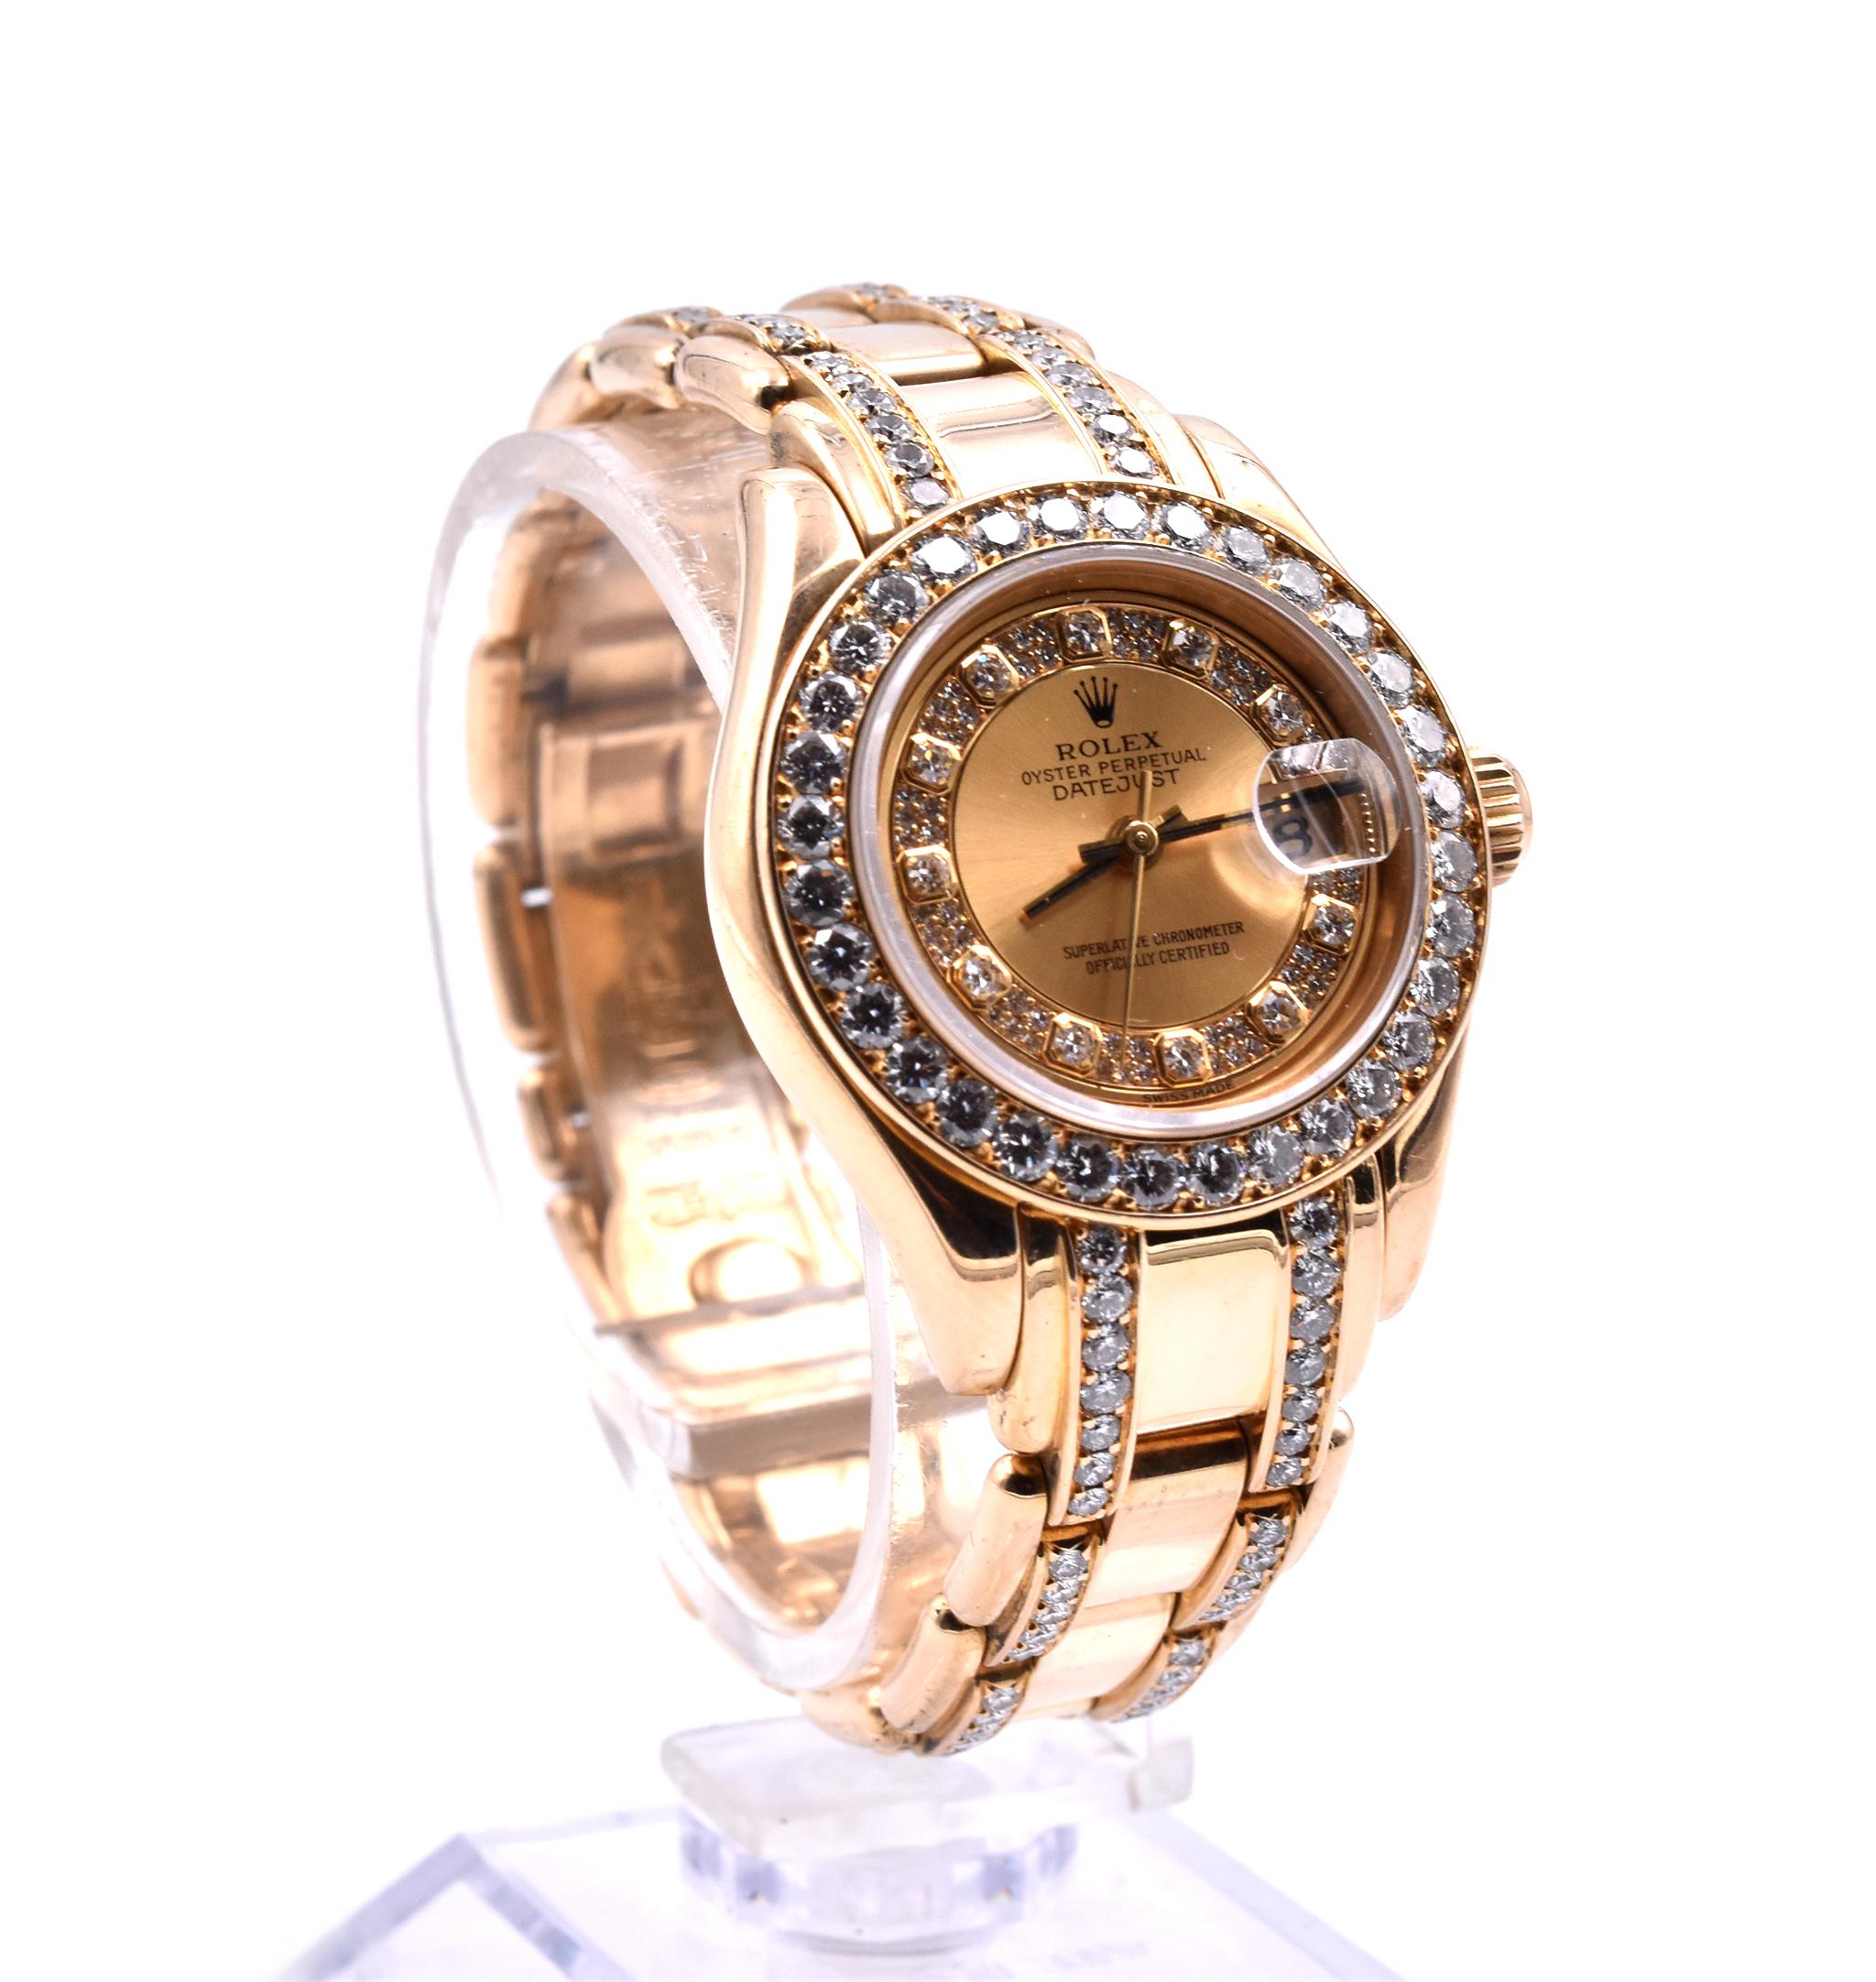 Movement: automatic 
Function: hours, minutes, seconds, date
Case: round 29mm 18k yellow gold case with factory diamond bezel, scratch resistant sapphire crystal, waterproof screw-down crown to 100 meters
Dial: champagne diamond dial with diamond